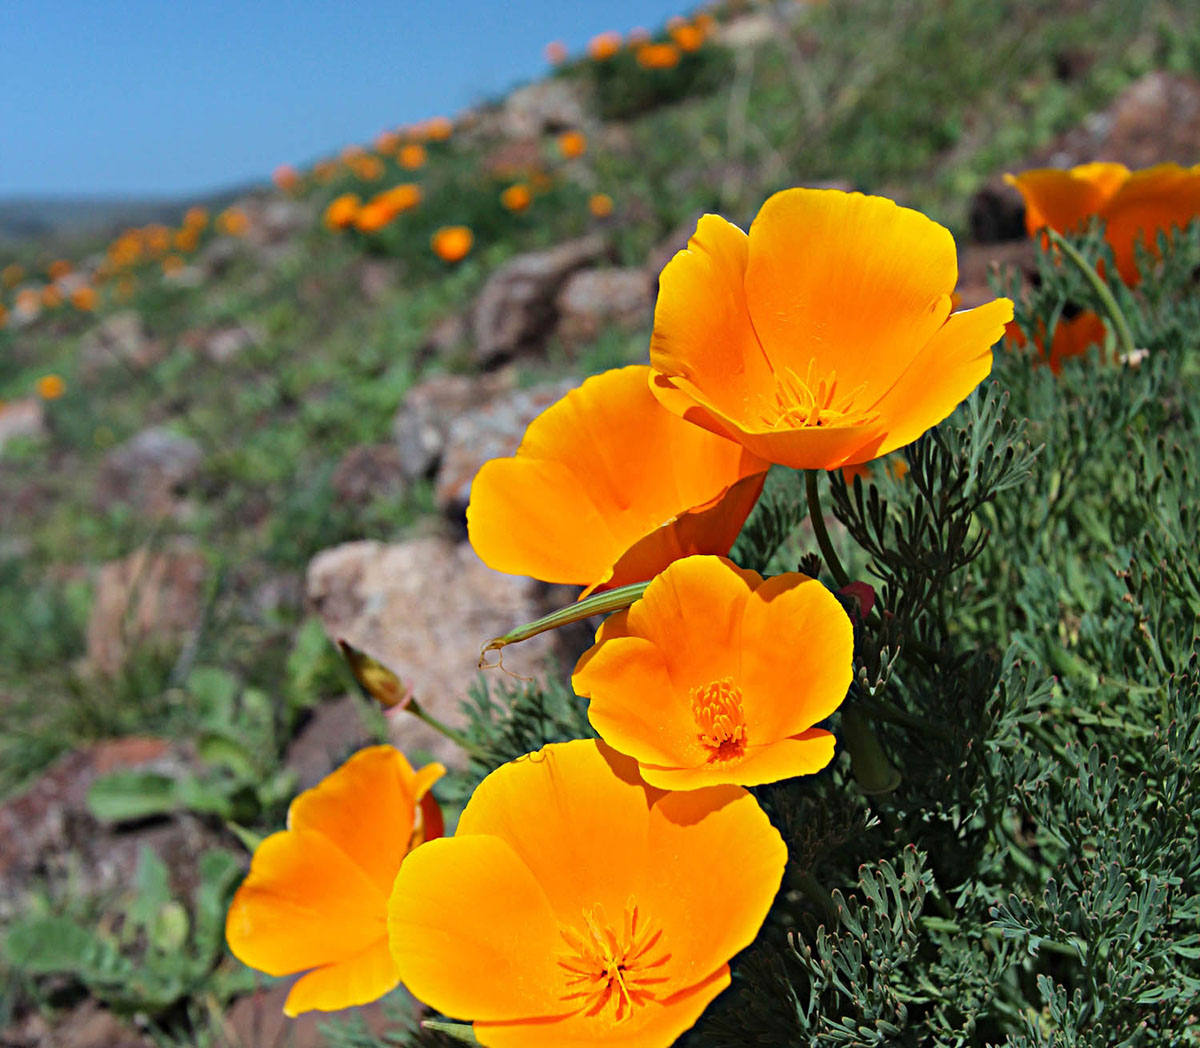 How Long For California Poppies To Germinate